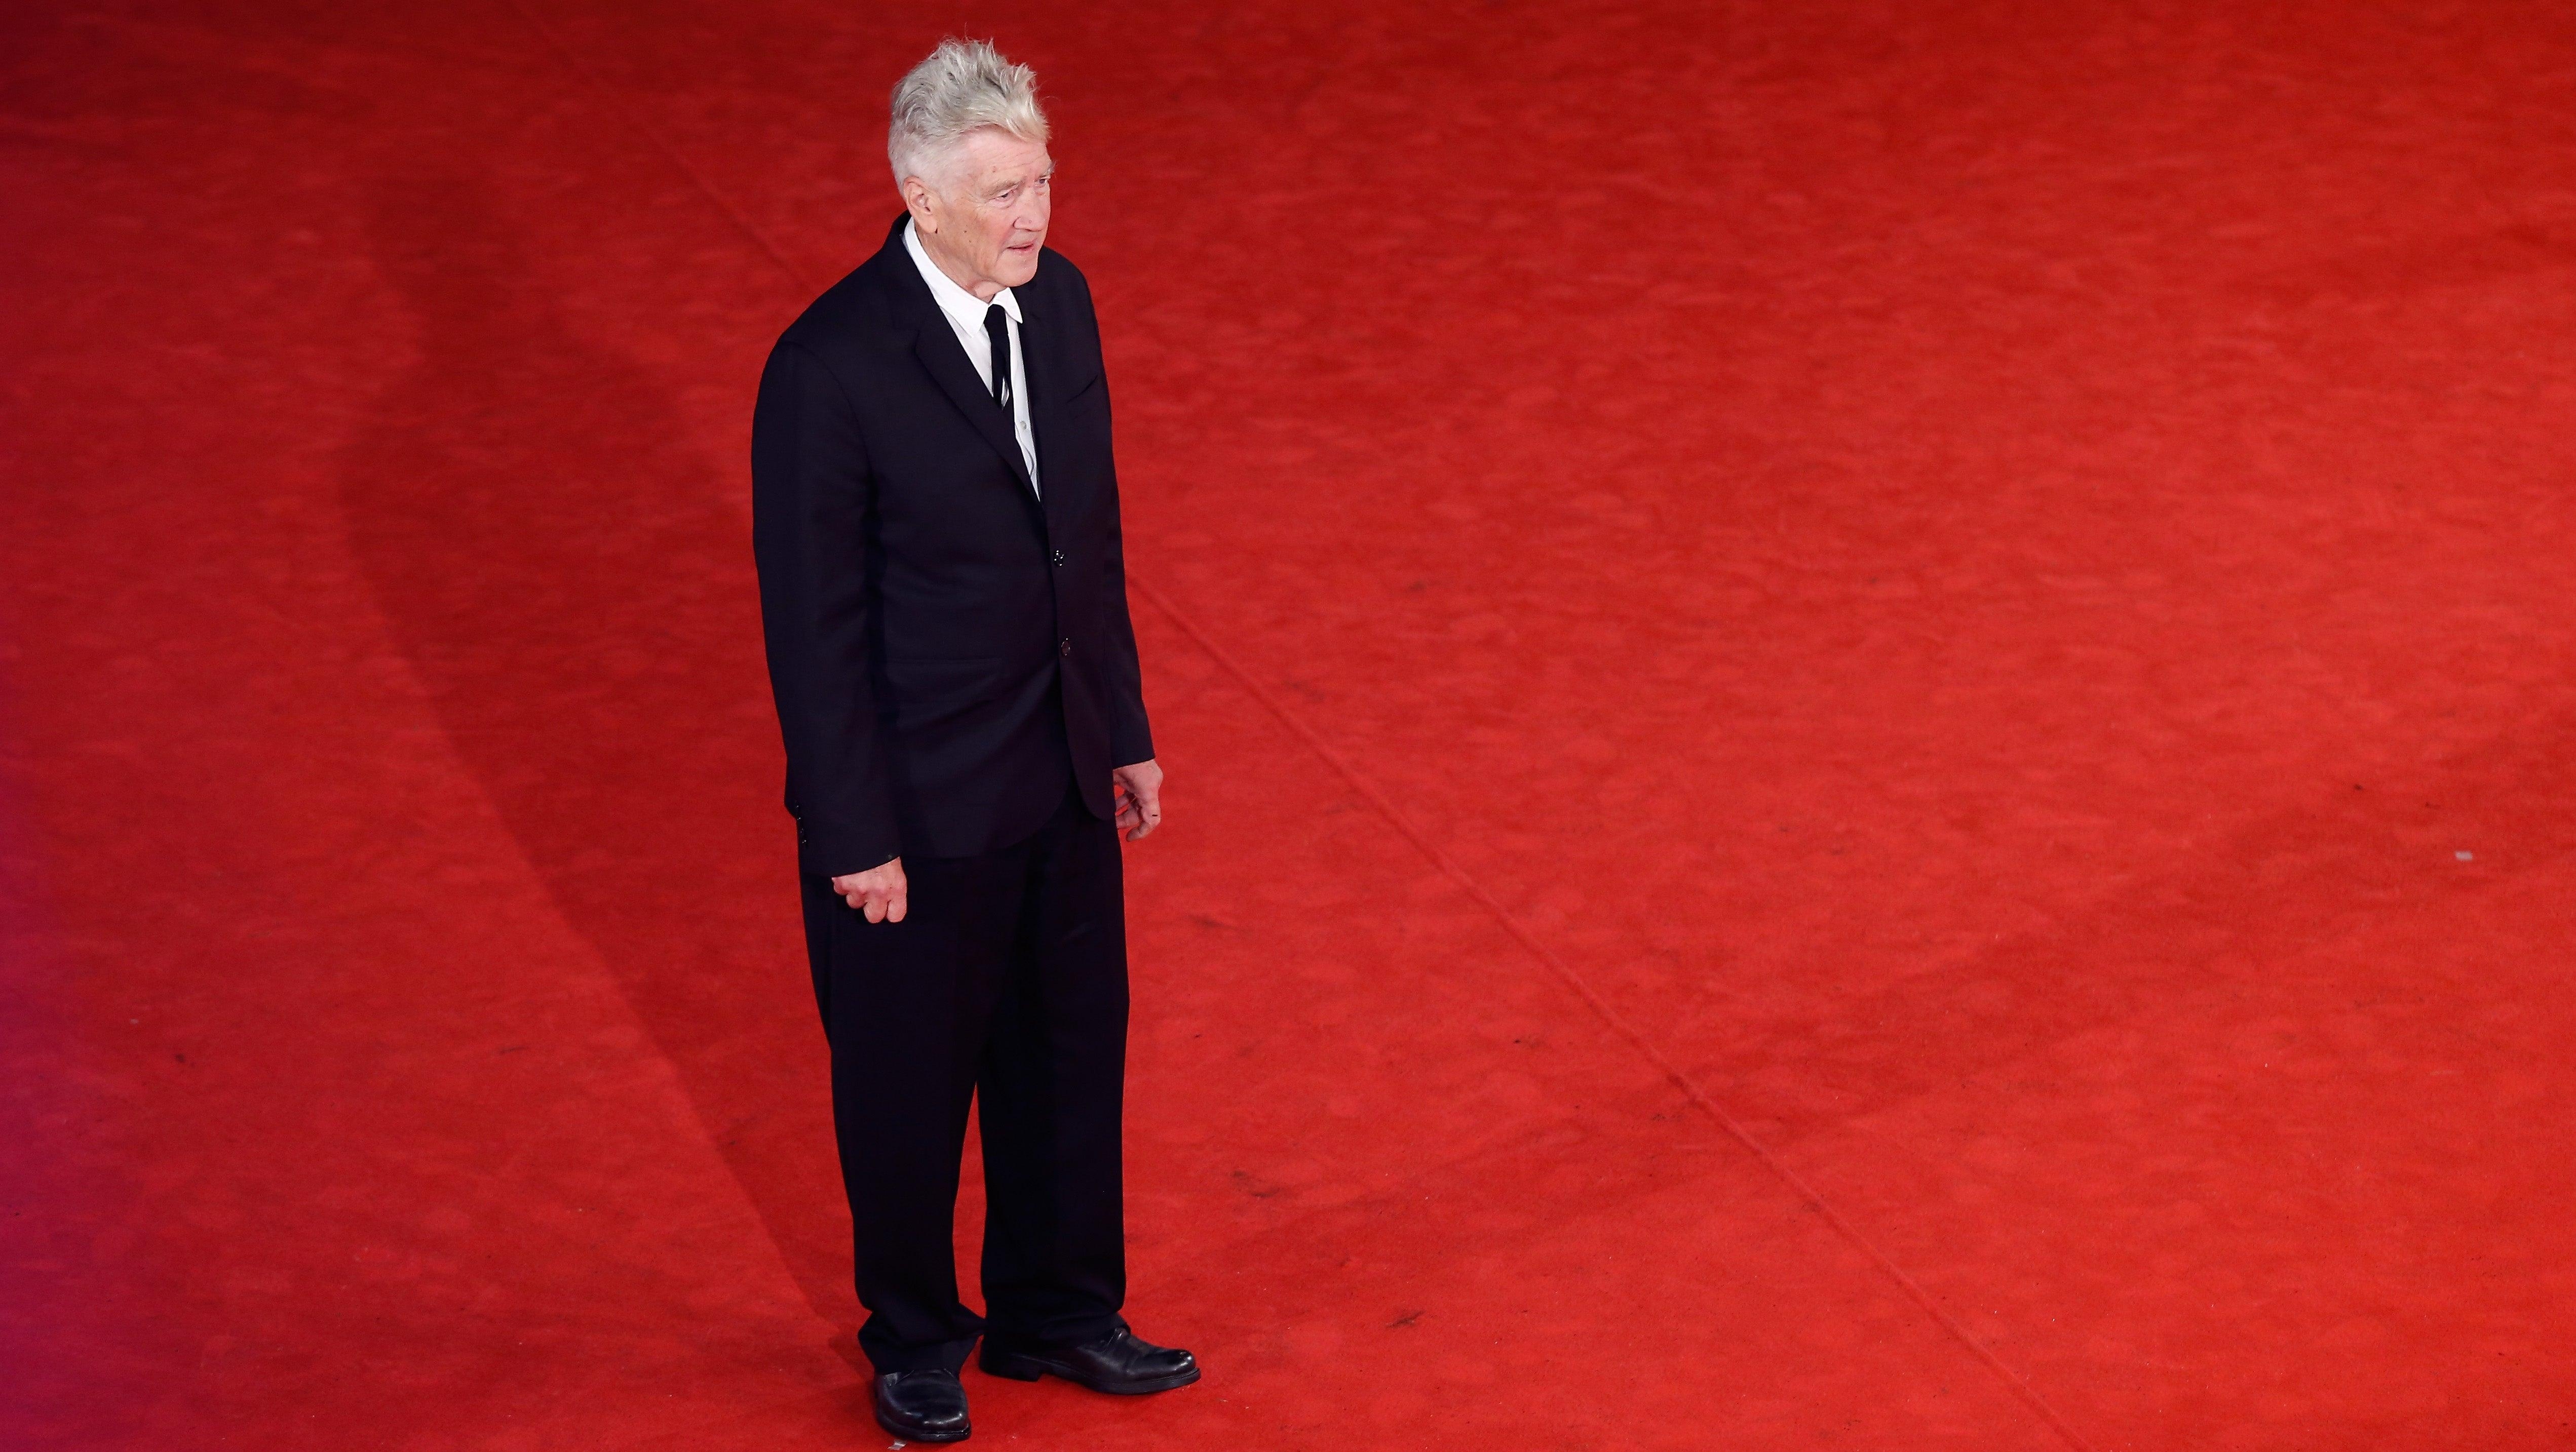 David Lynch confirms nice weather, no new film at Cannes during daily weather report